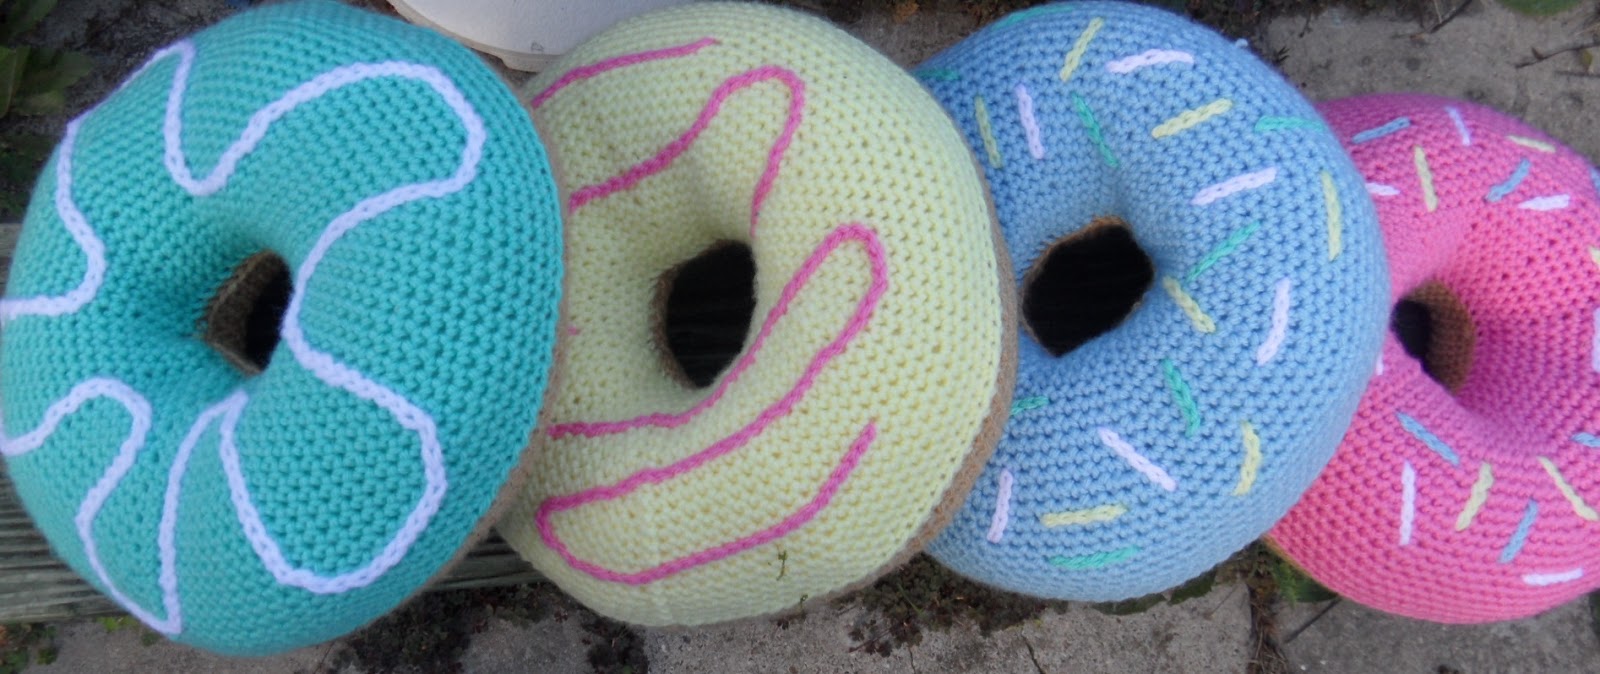 Crochet Donut Pillows Are The Stuff Sweet Dreams Are Made Of